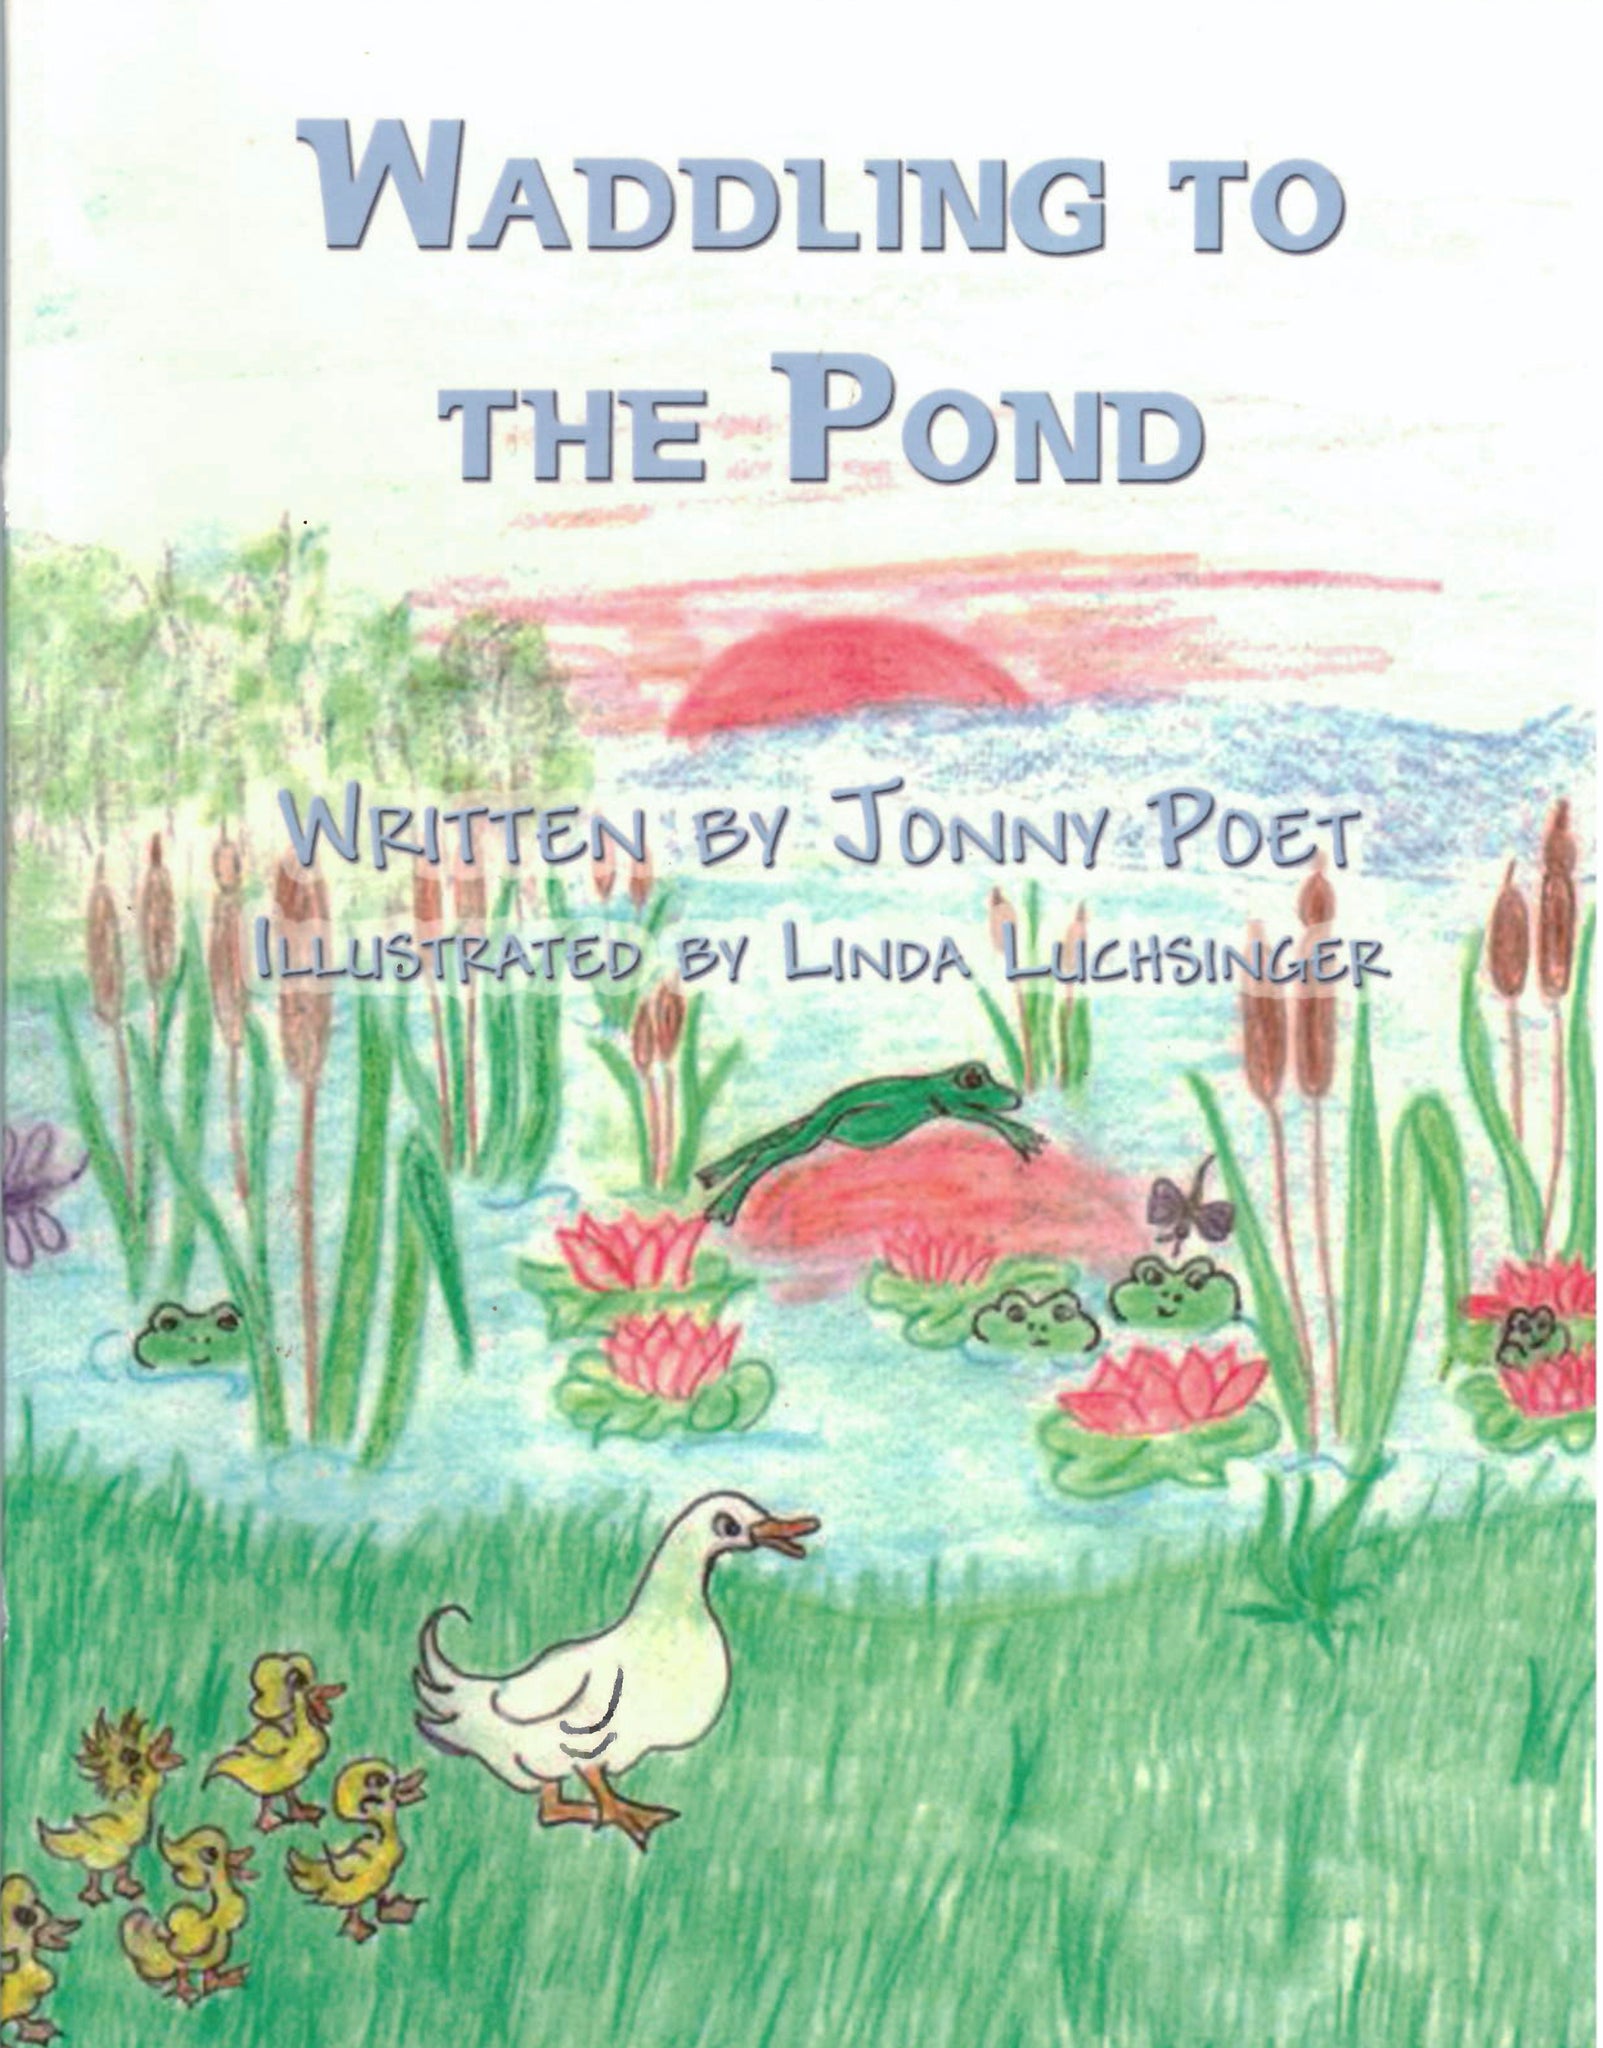 Waddling to the Pond